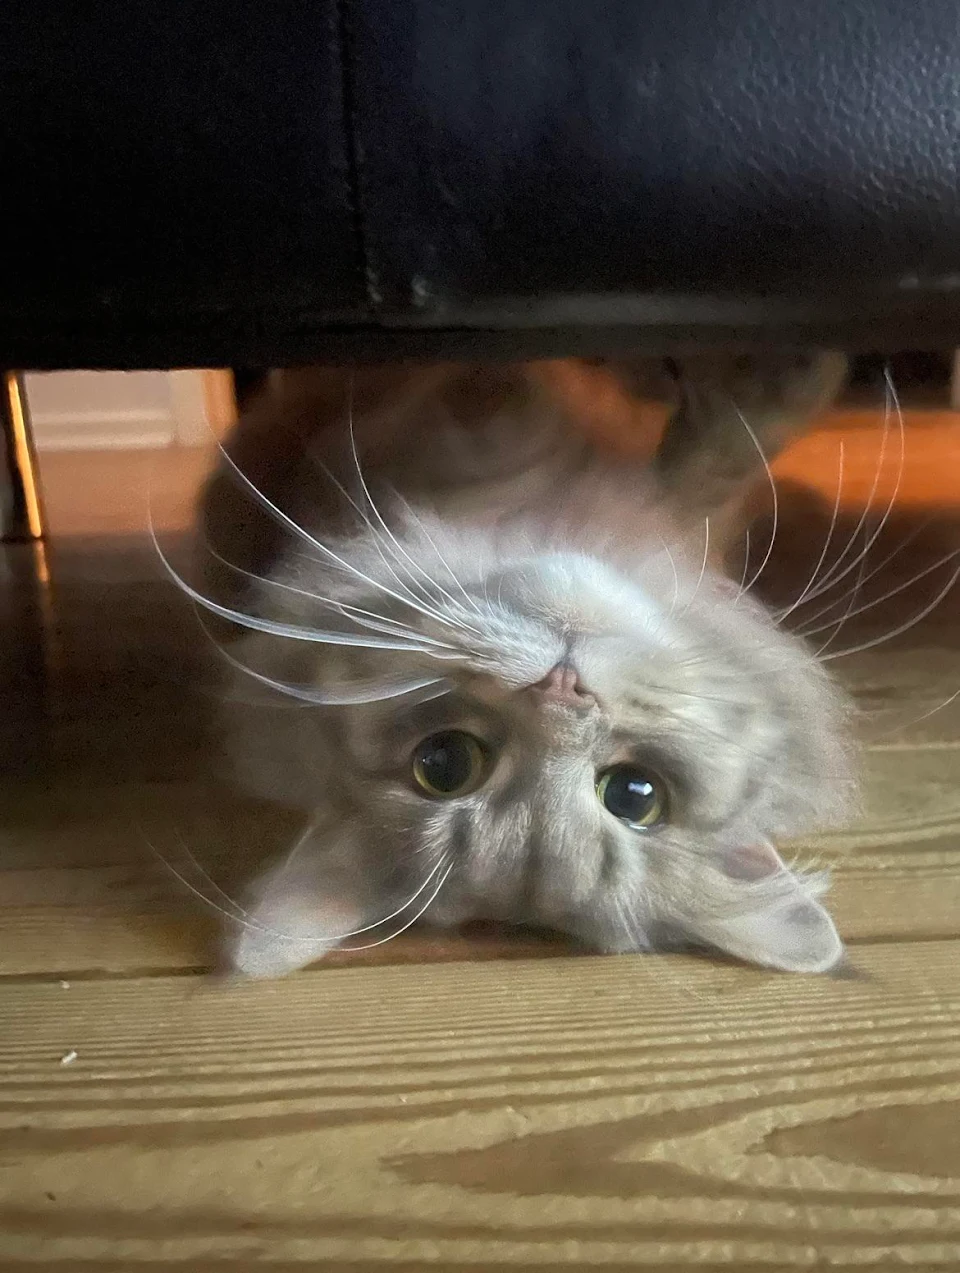 My 1 year old cat under our sofa